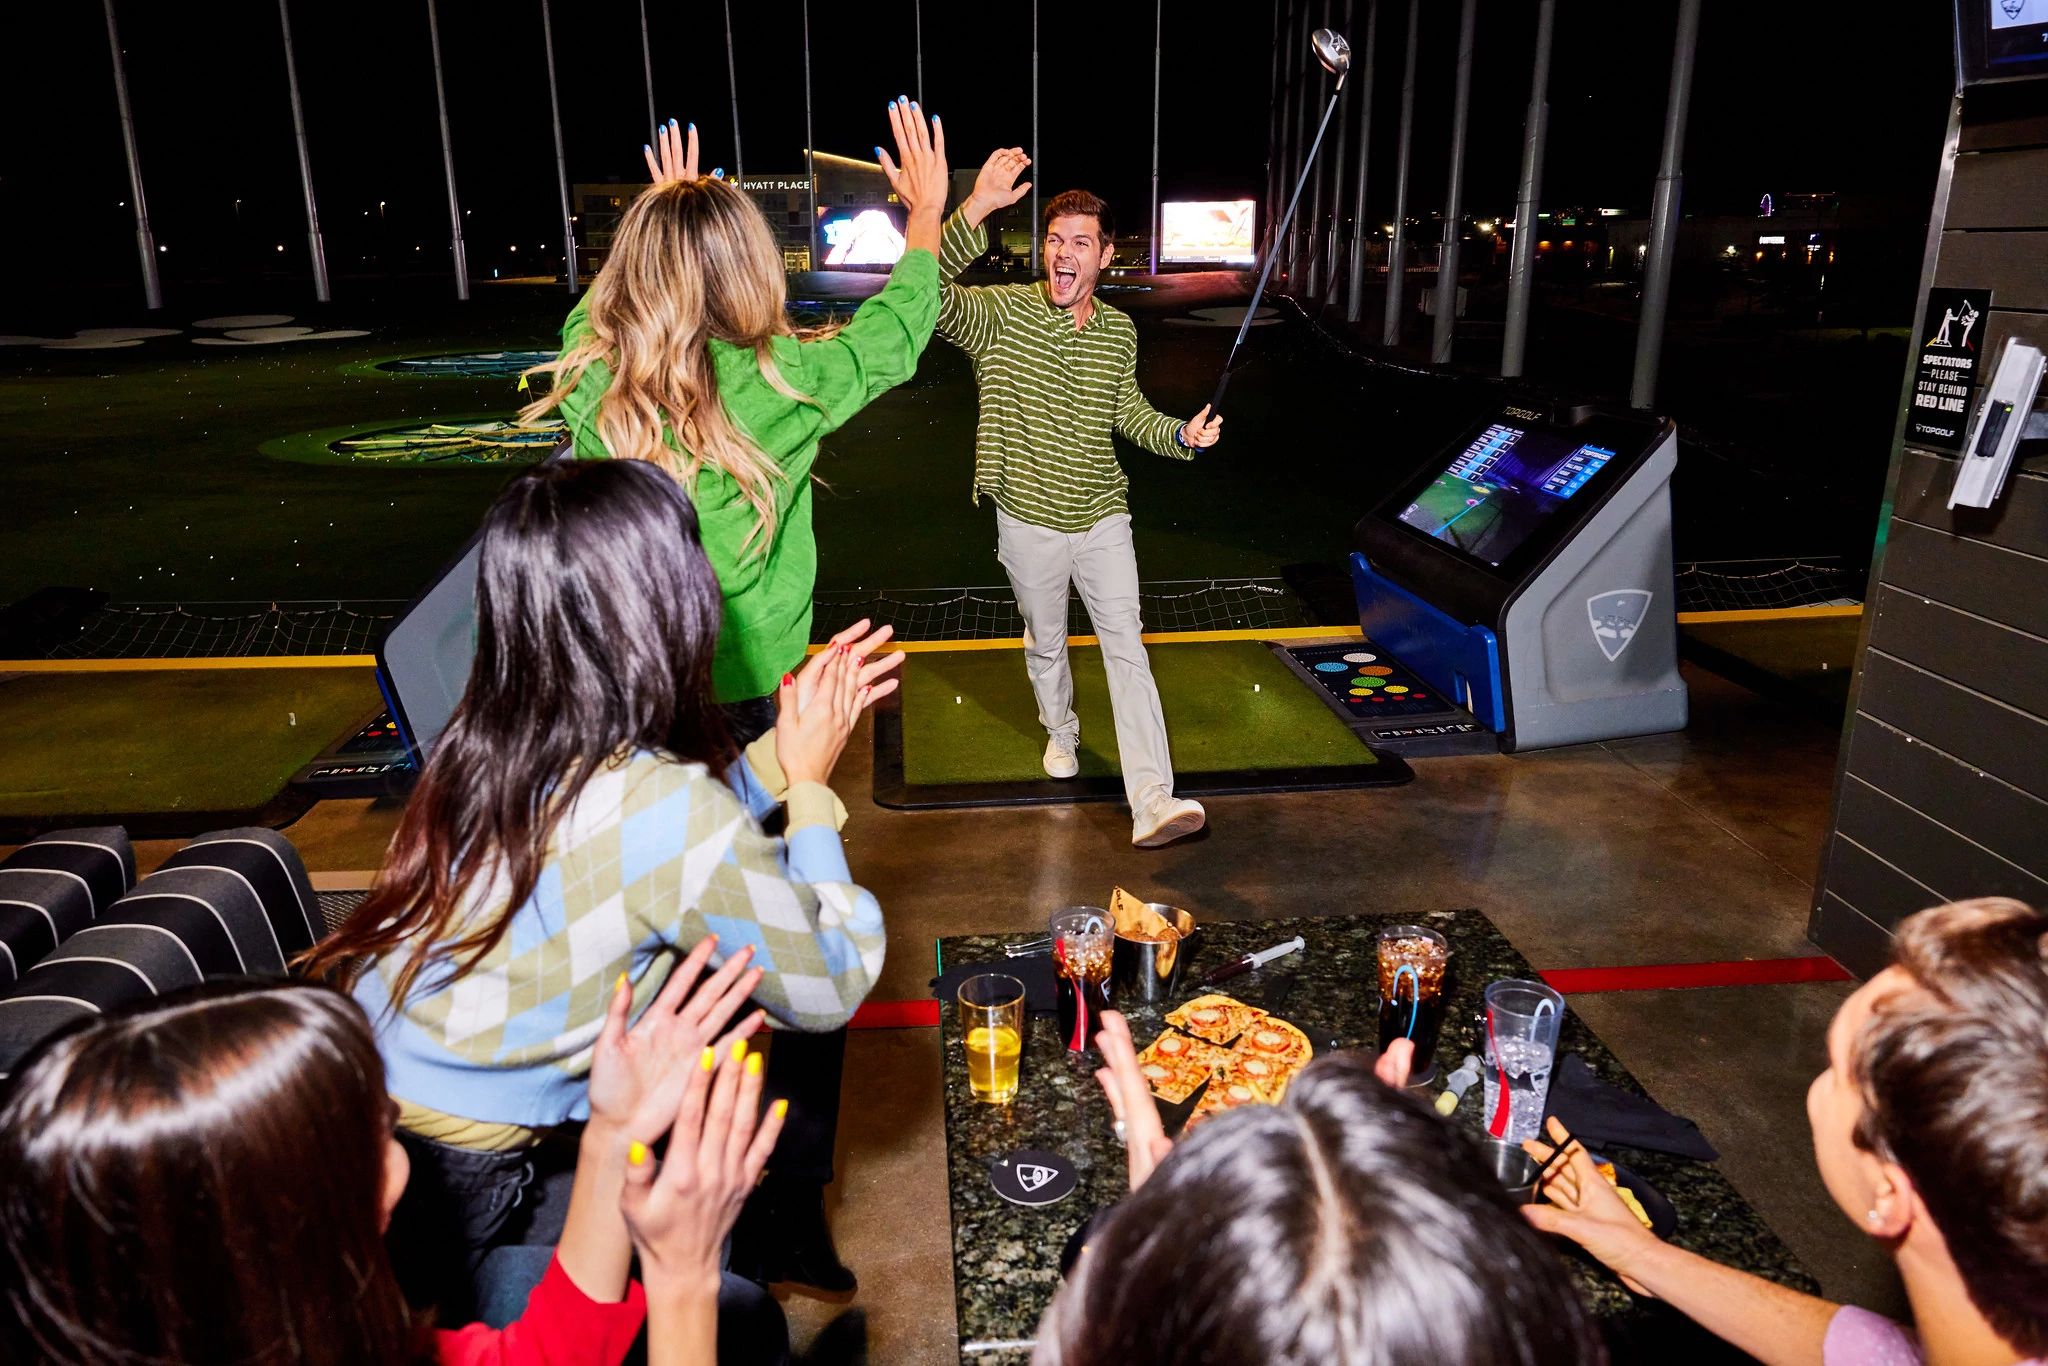 Teeing it up at Topgolf Orlando - The Orlando Duo